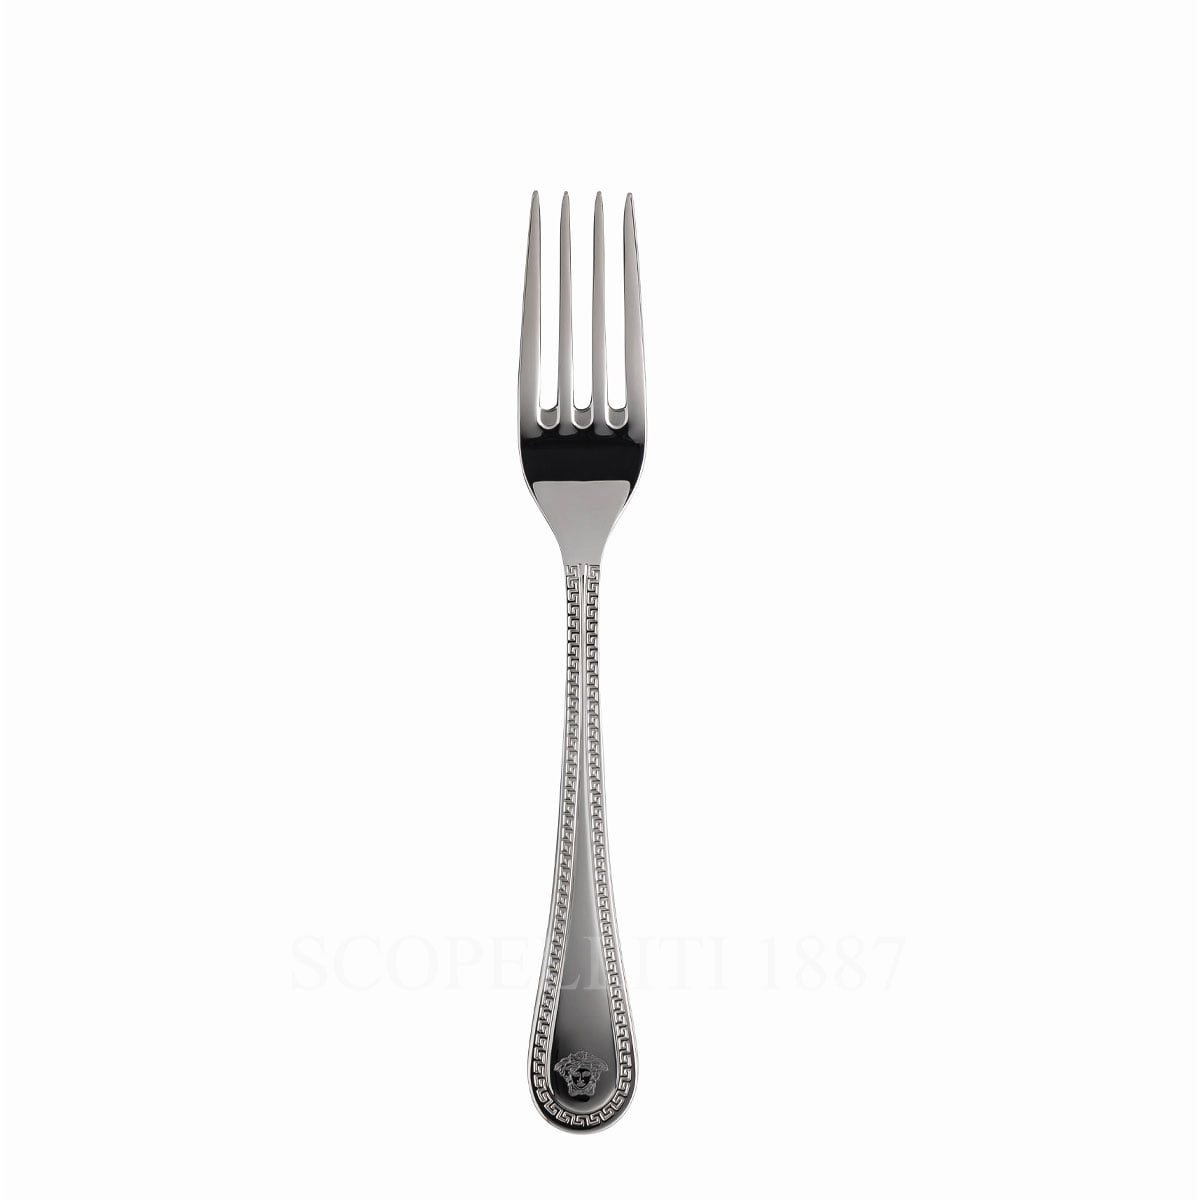 Asking 12 Pieces Dessert Forks Stainless Steel Small Forks 